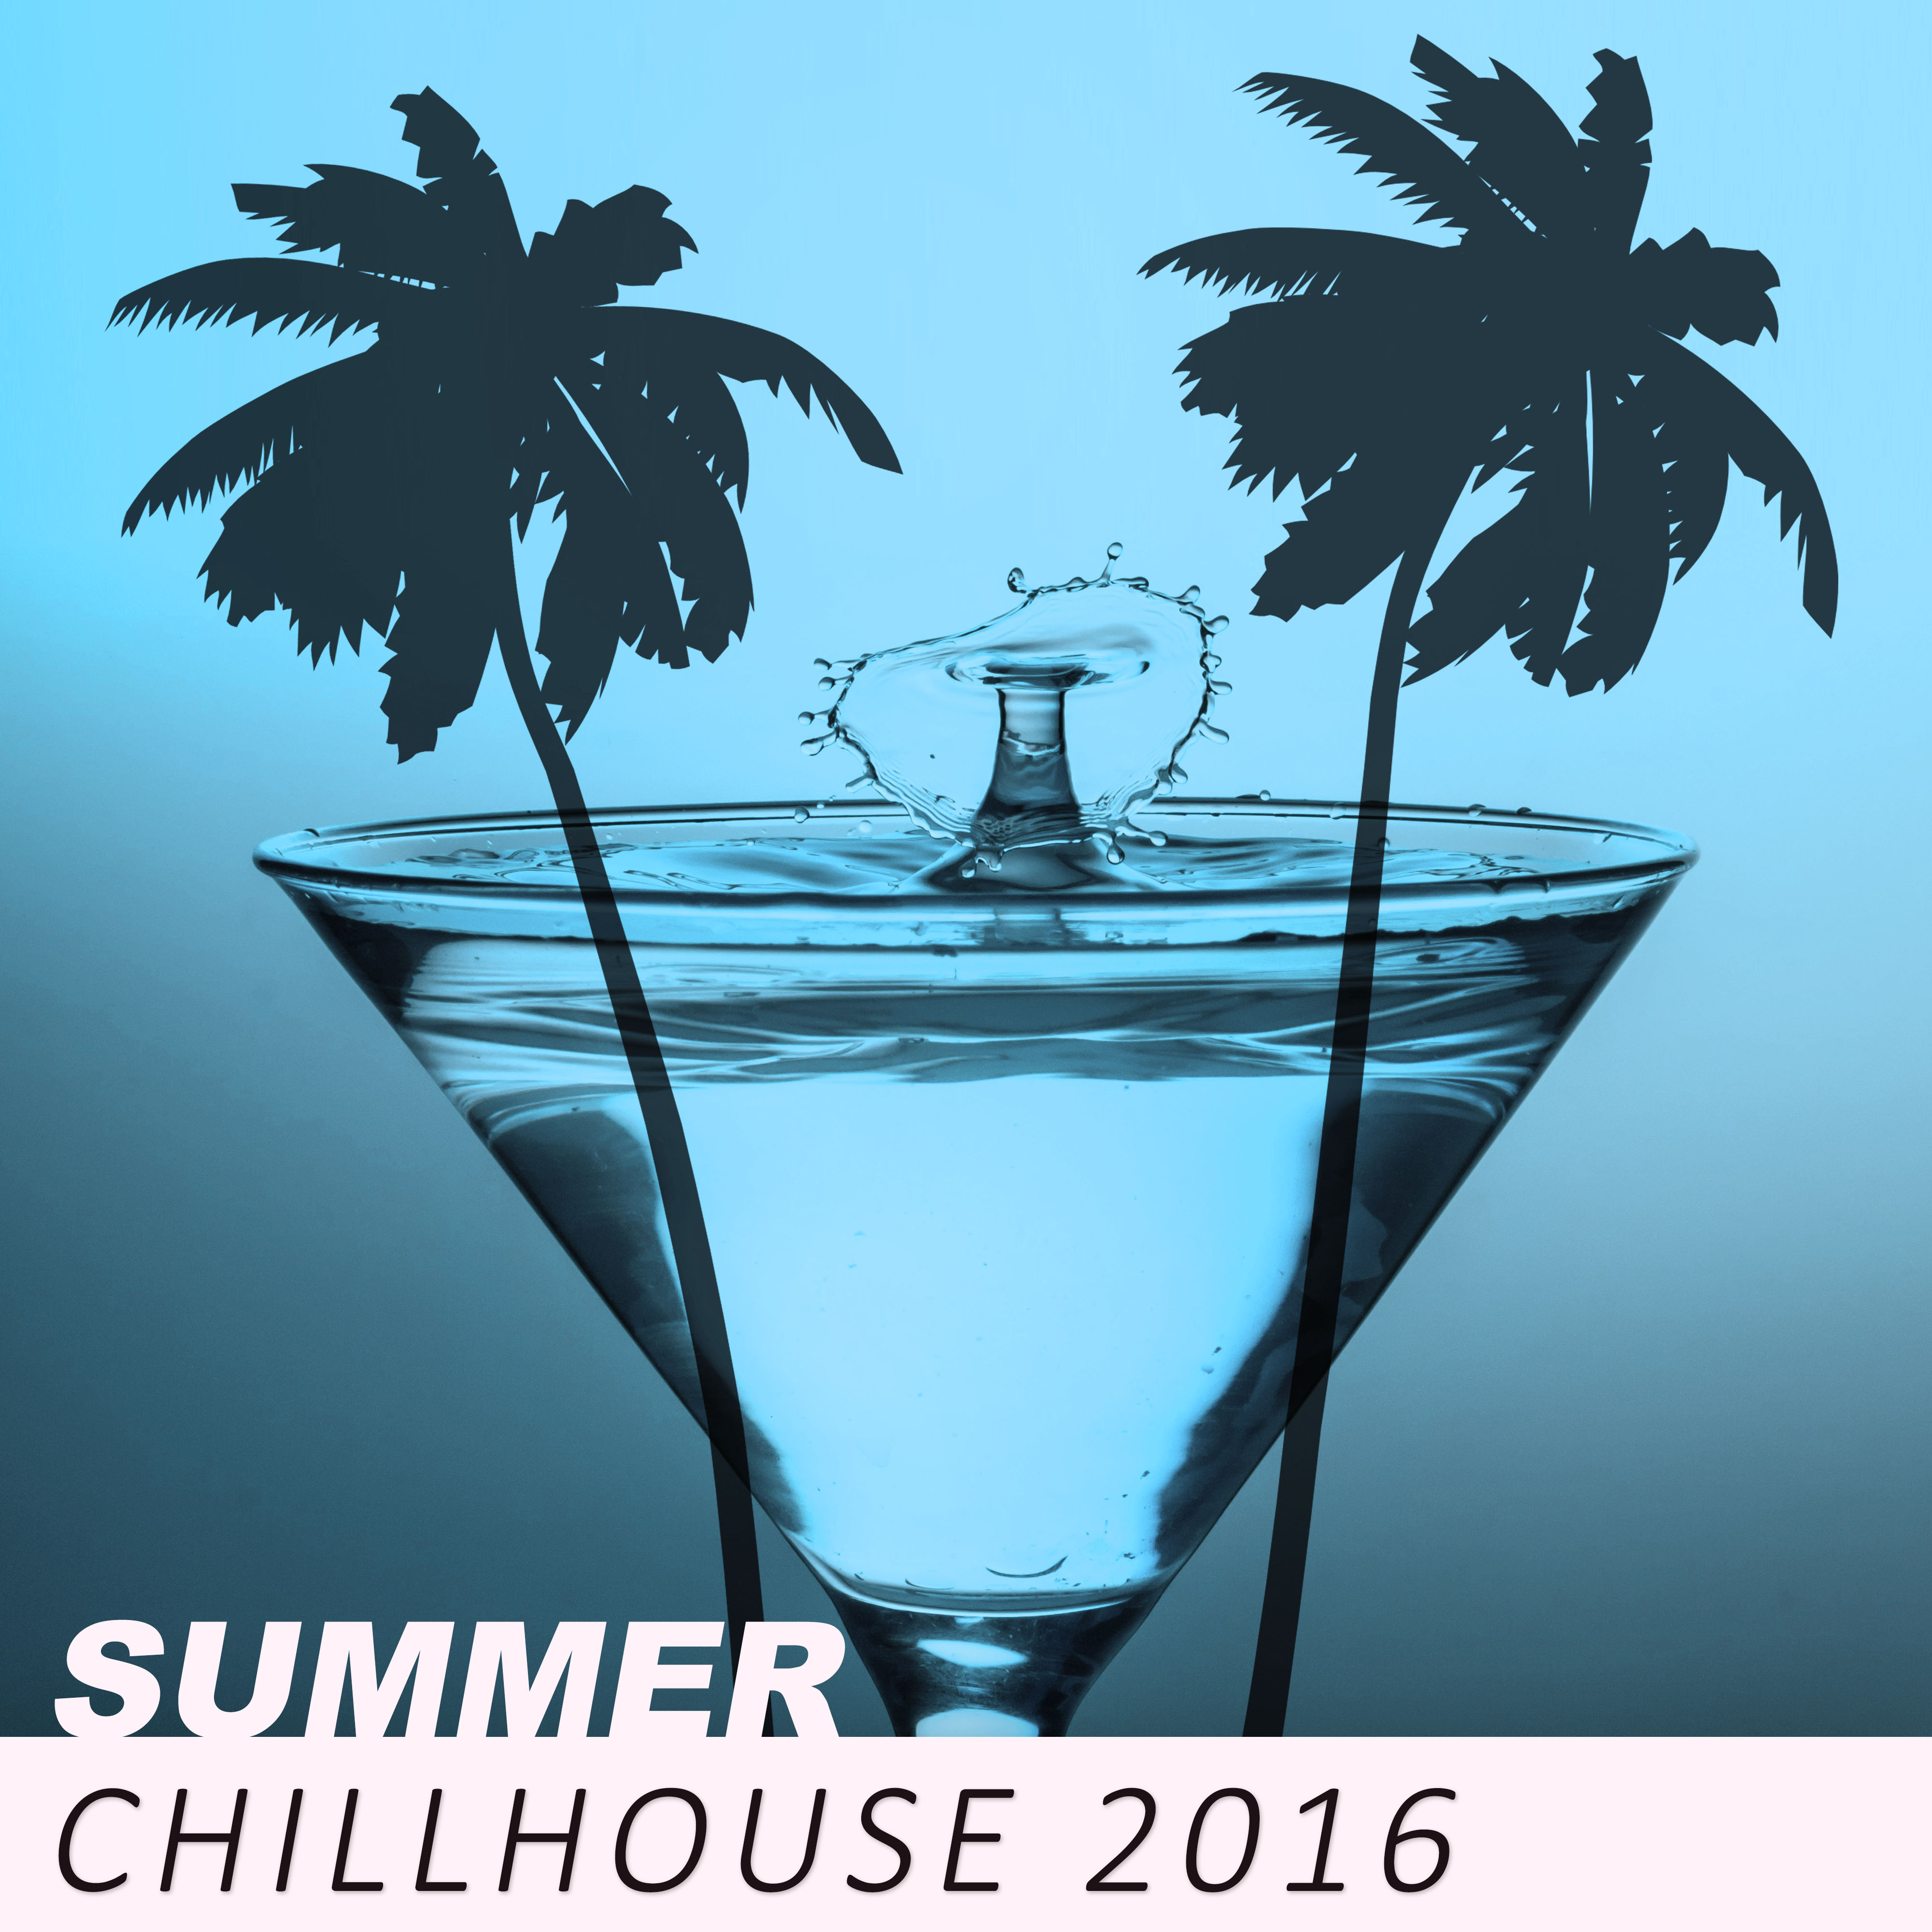 Summer Chillhouse 2016 – Best Holiday Ever, Miami to Ibiza